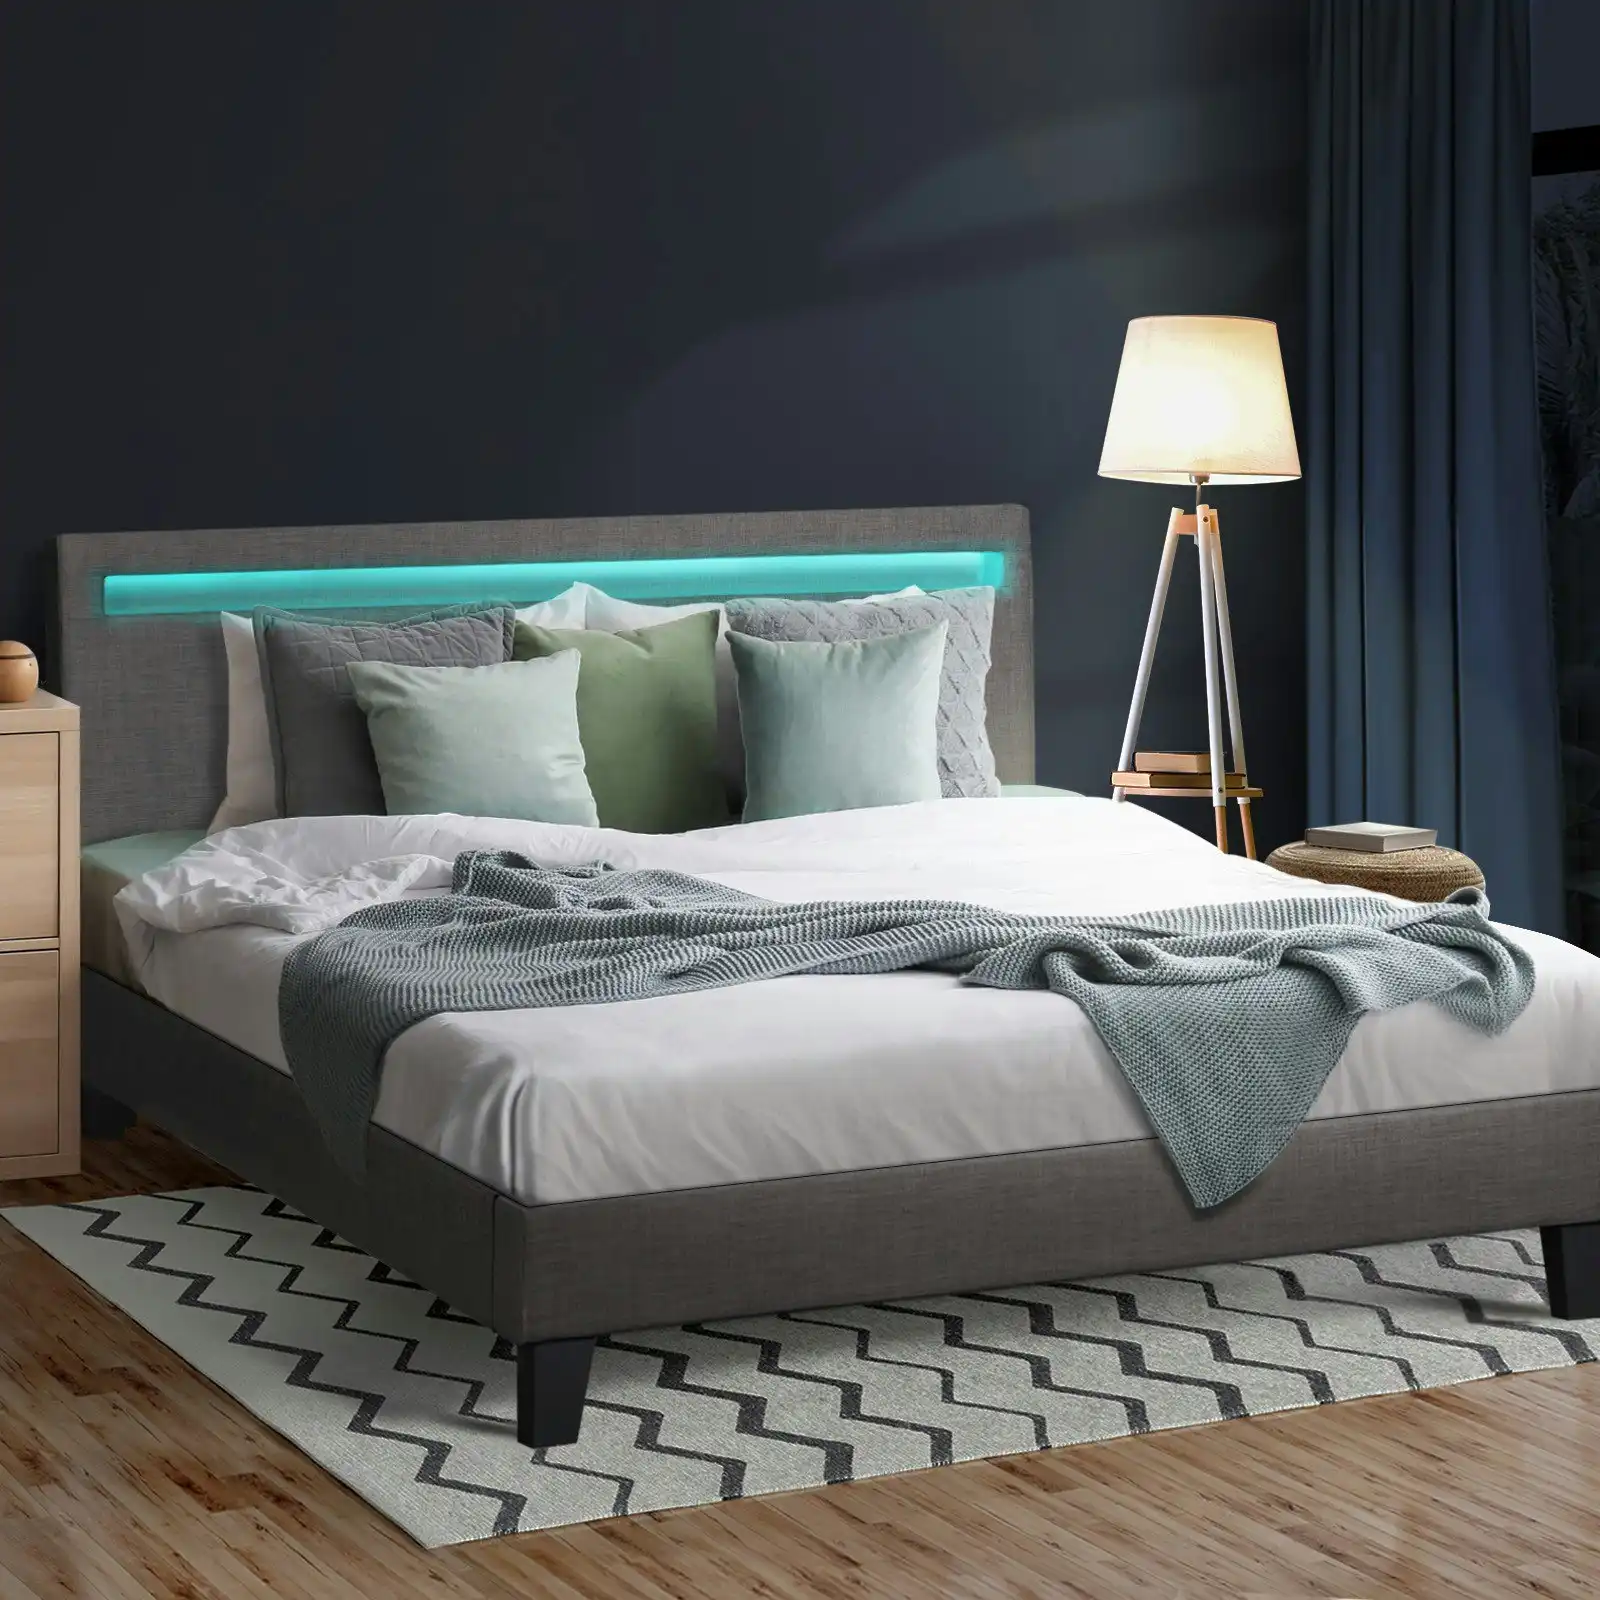 Oikiture Bed Frame RGB LED Double Size Mattress Base Platform Wooden Grey Fabric